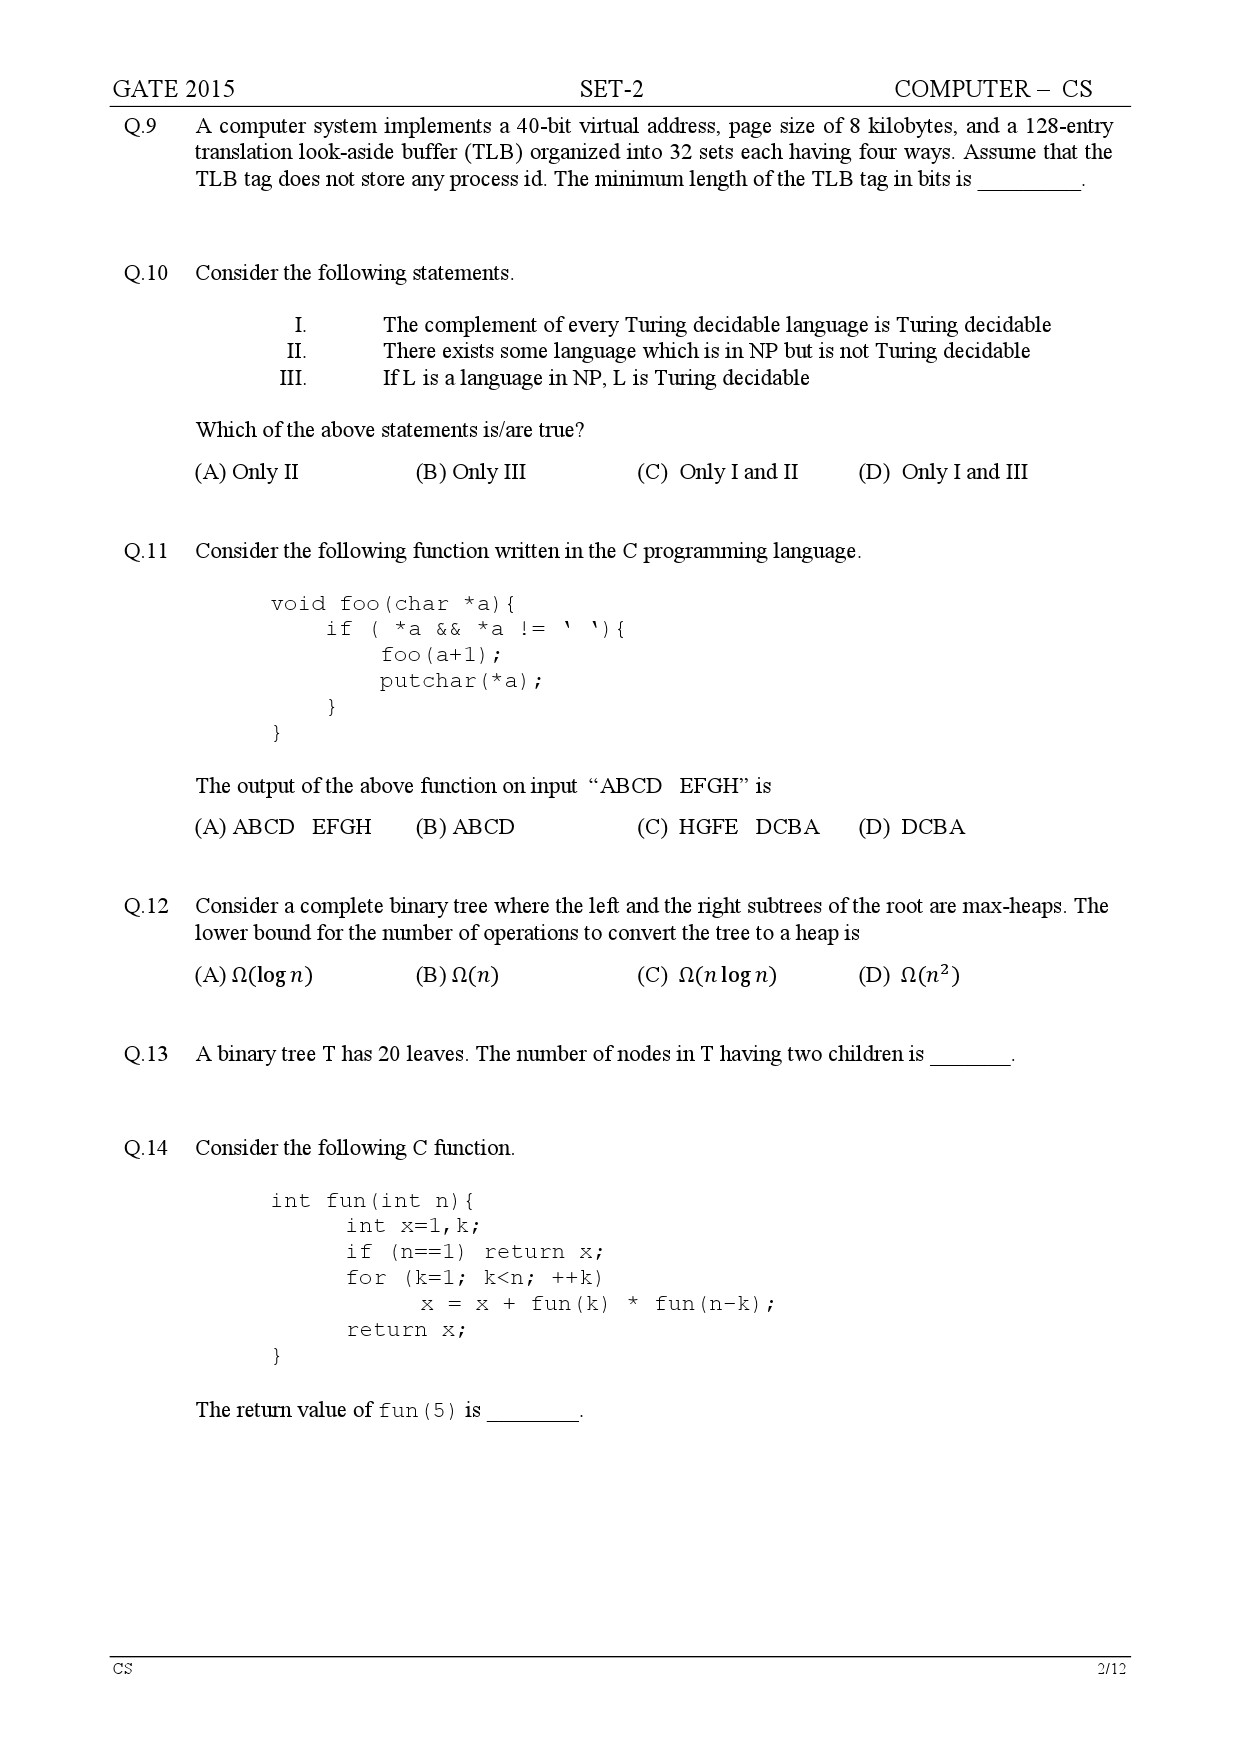 GATE Exam Question Paper 2015 Computer Science and Information Technology Set 2 2